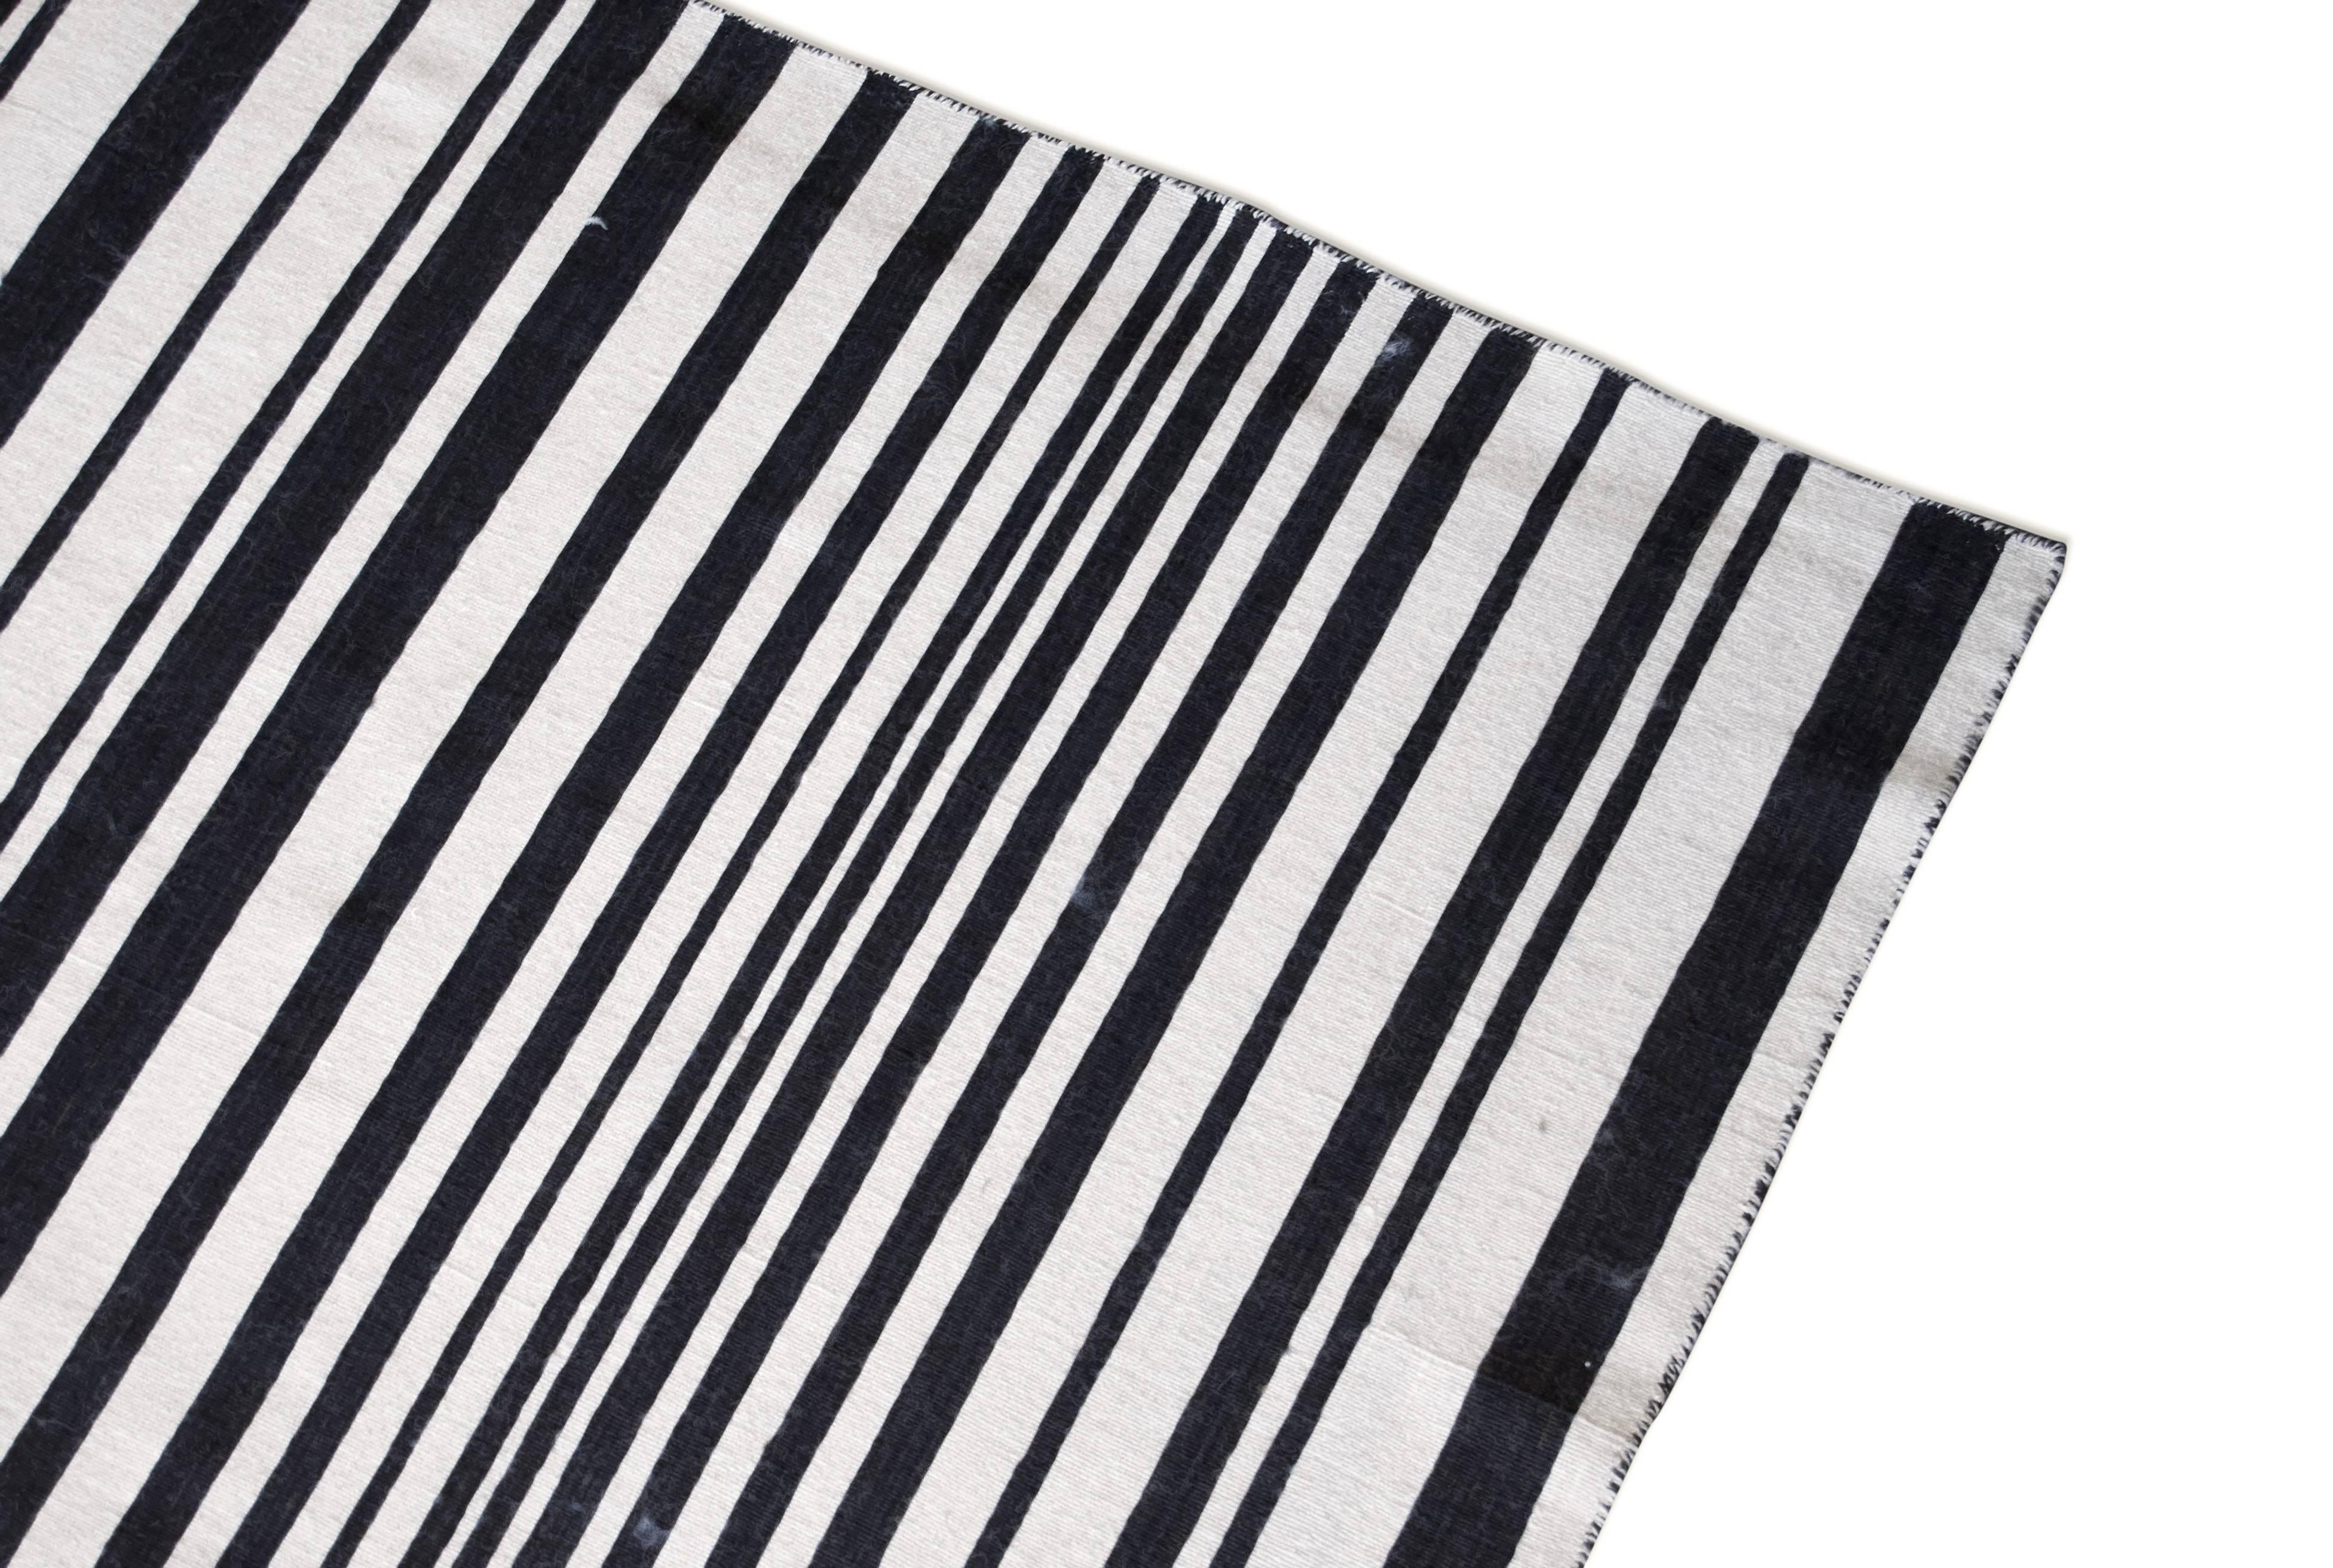 Bold black and white striped vintage modern Kilim. Flatware, Indian Kilim wool. Wear consistent with age.